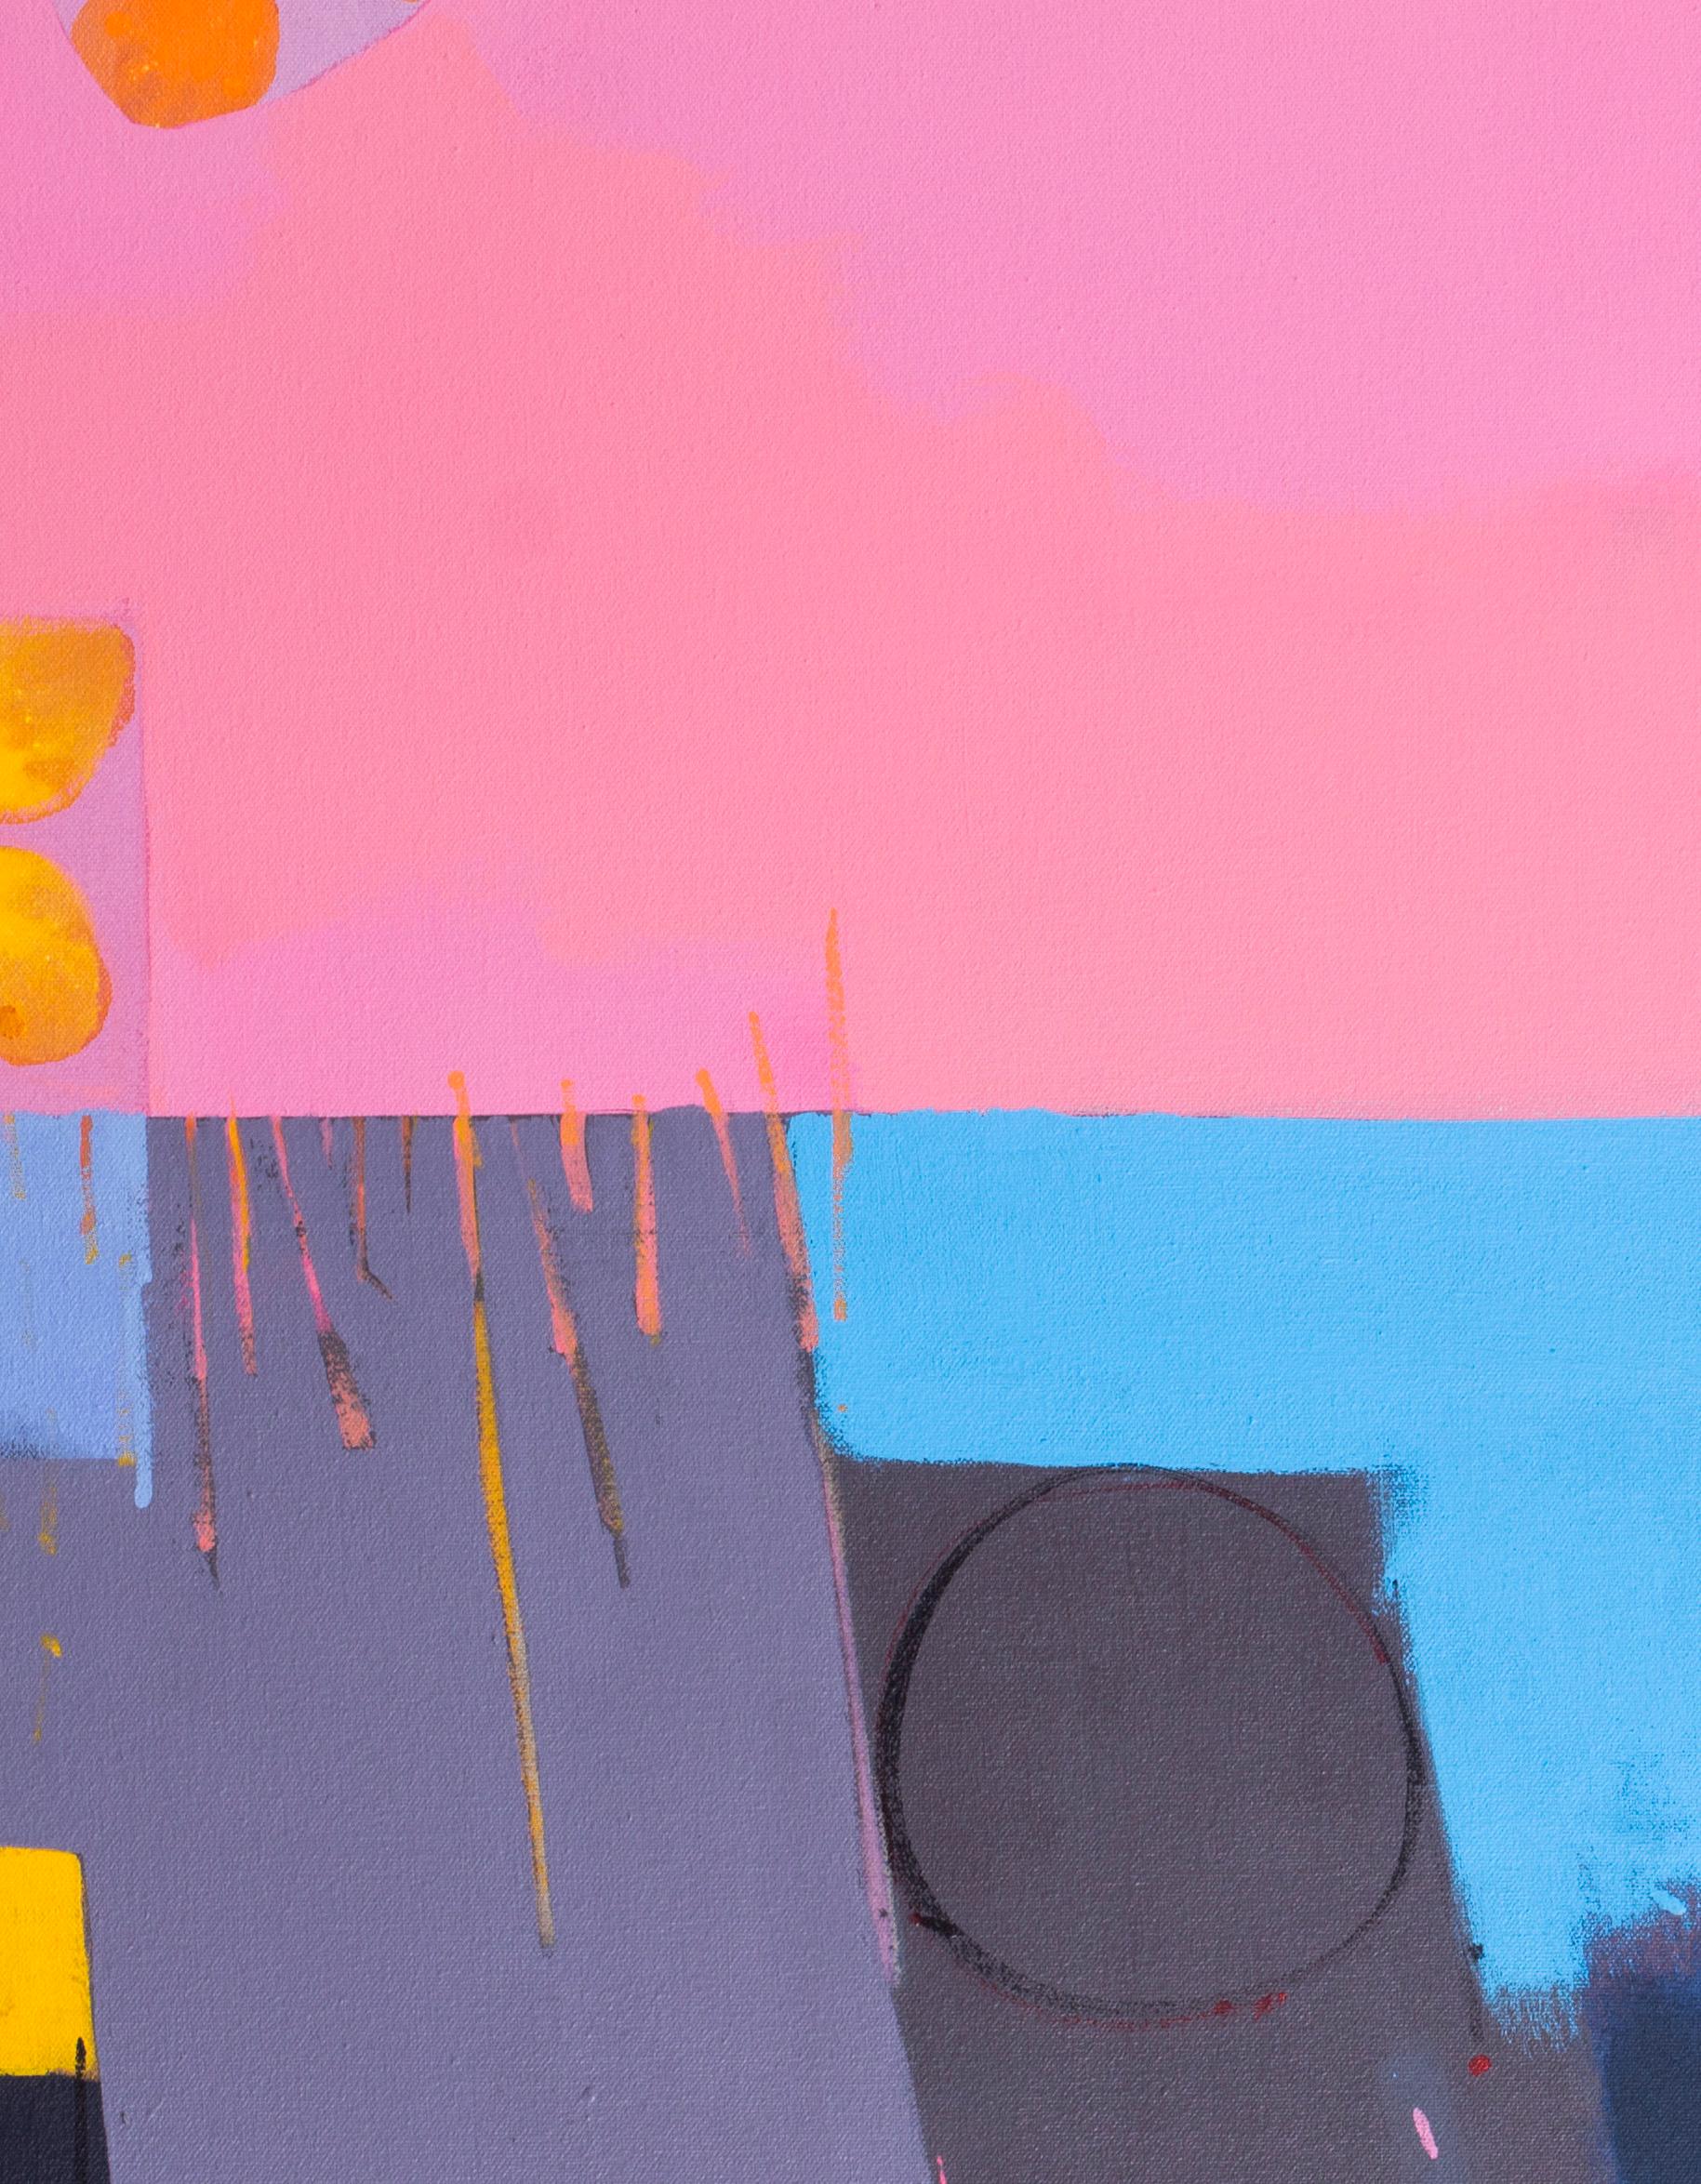 British large and bright contemporary abstract painting, strong pinks and blues - Painting by Mark Andrews Godwin